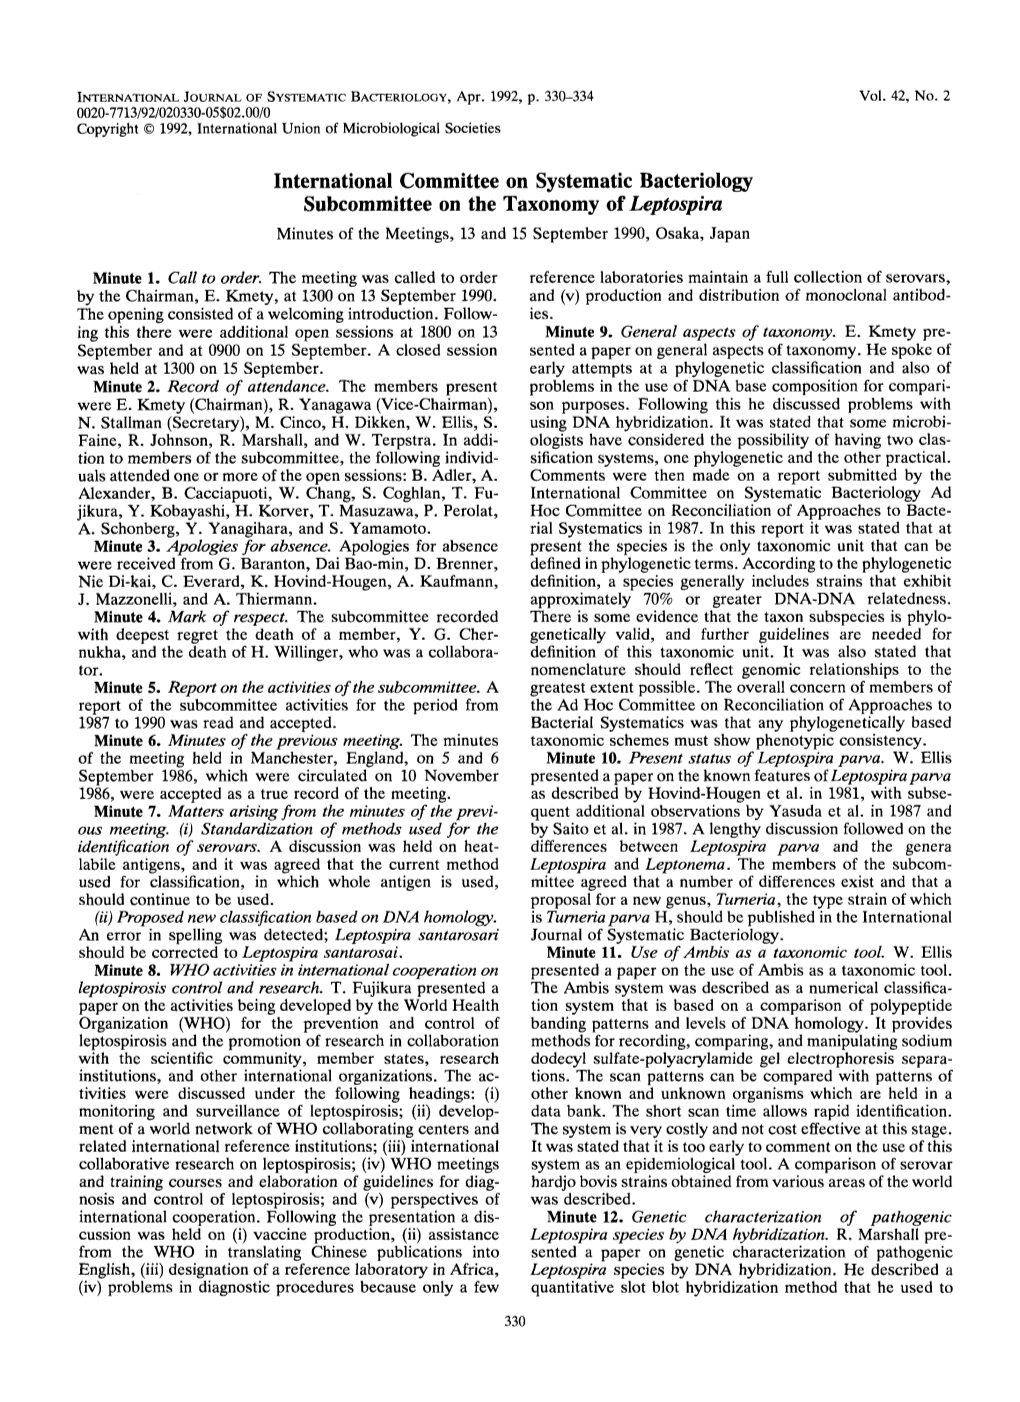 International Committee on Systematic Bacteriology Subcommittee on the Taxonomy of Leptospira Minutes of the Meetings, 13 and 15 September 1990, Osaka, Japan